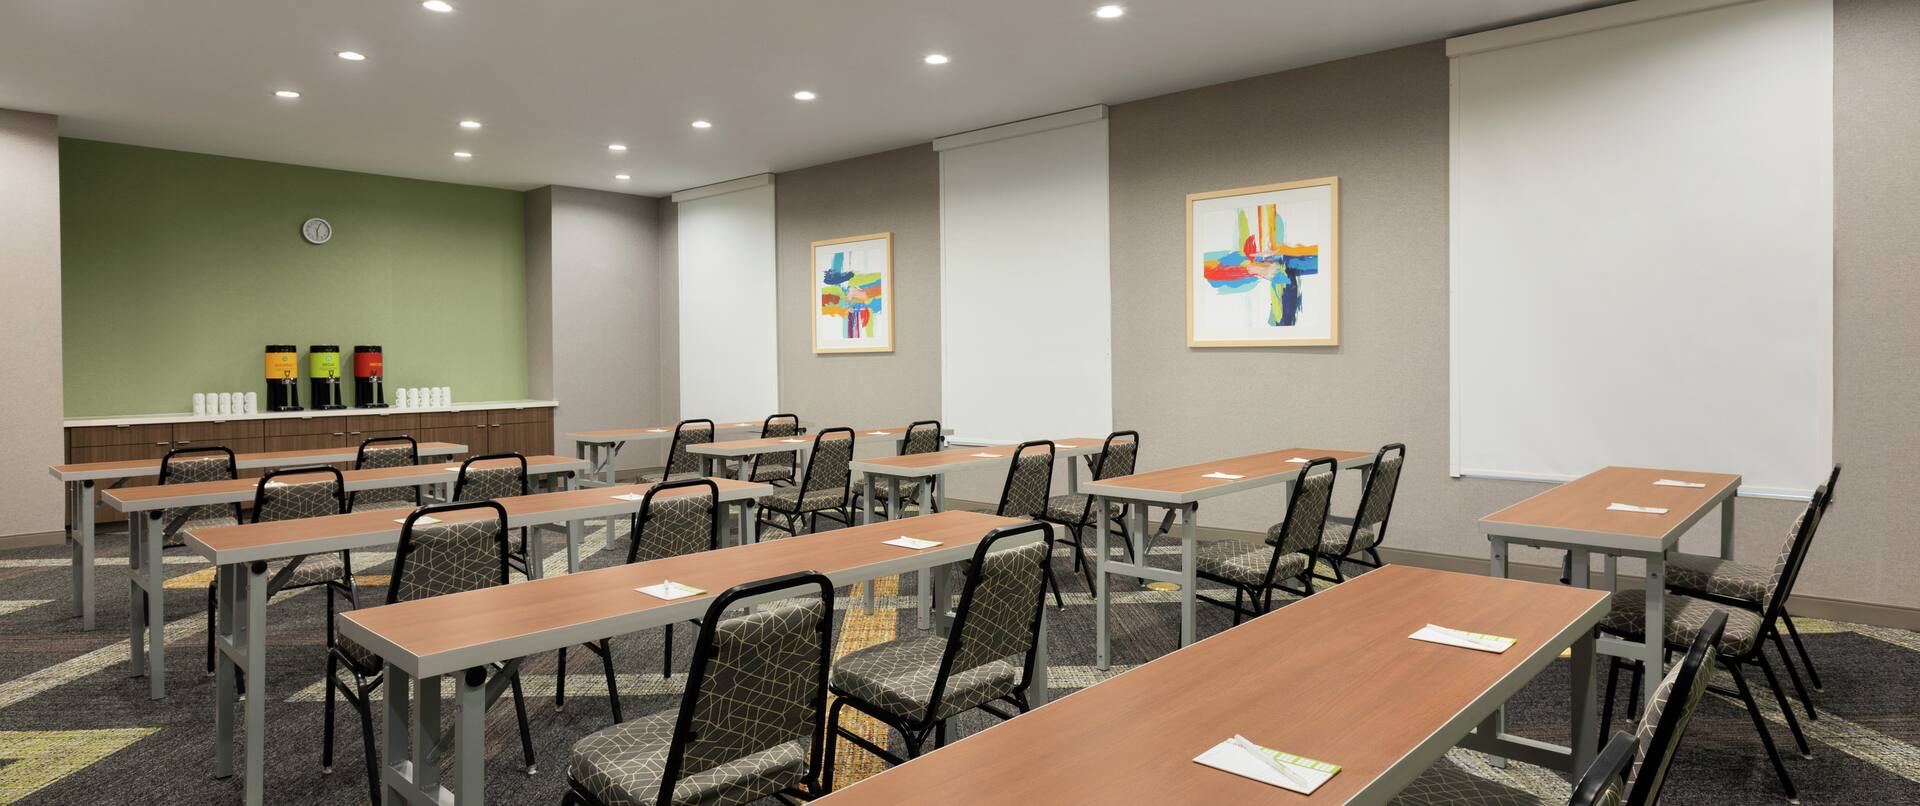 Spacious meeting room with classroom style tables, chairs, notepads, pens, and refreshment station.